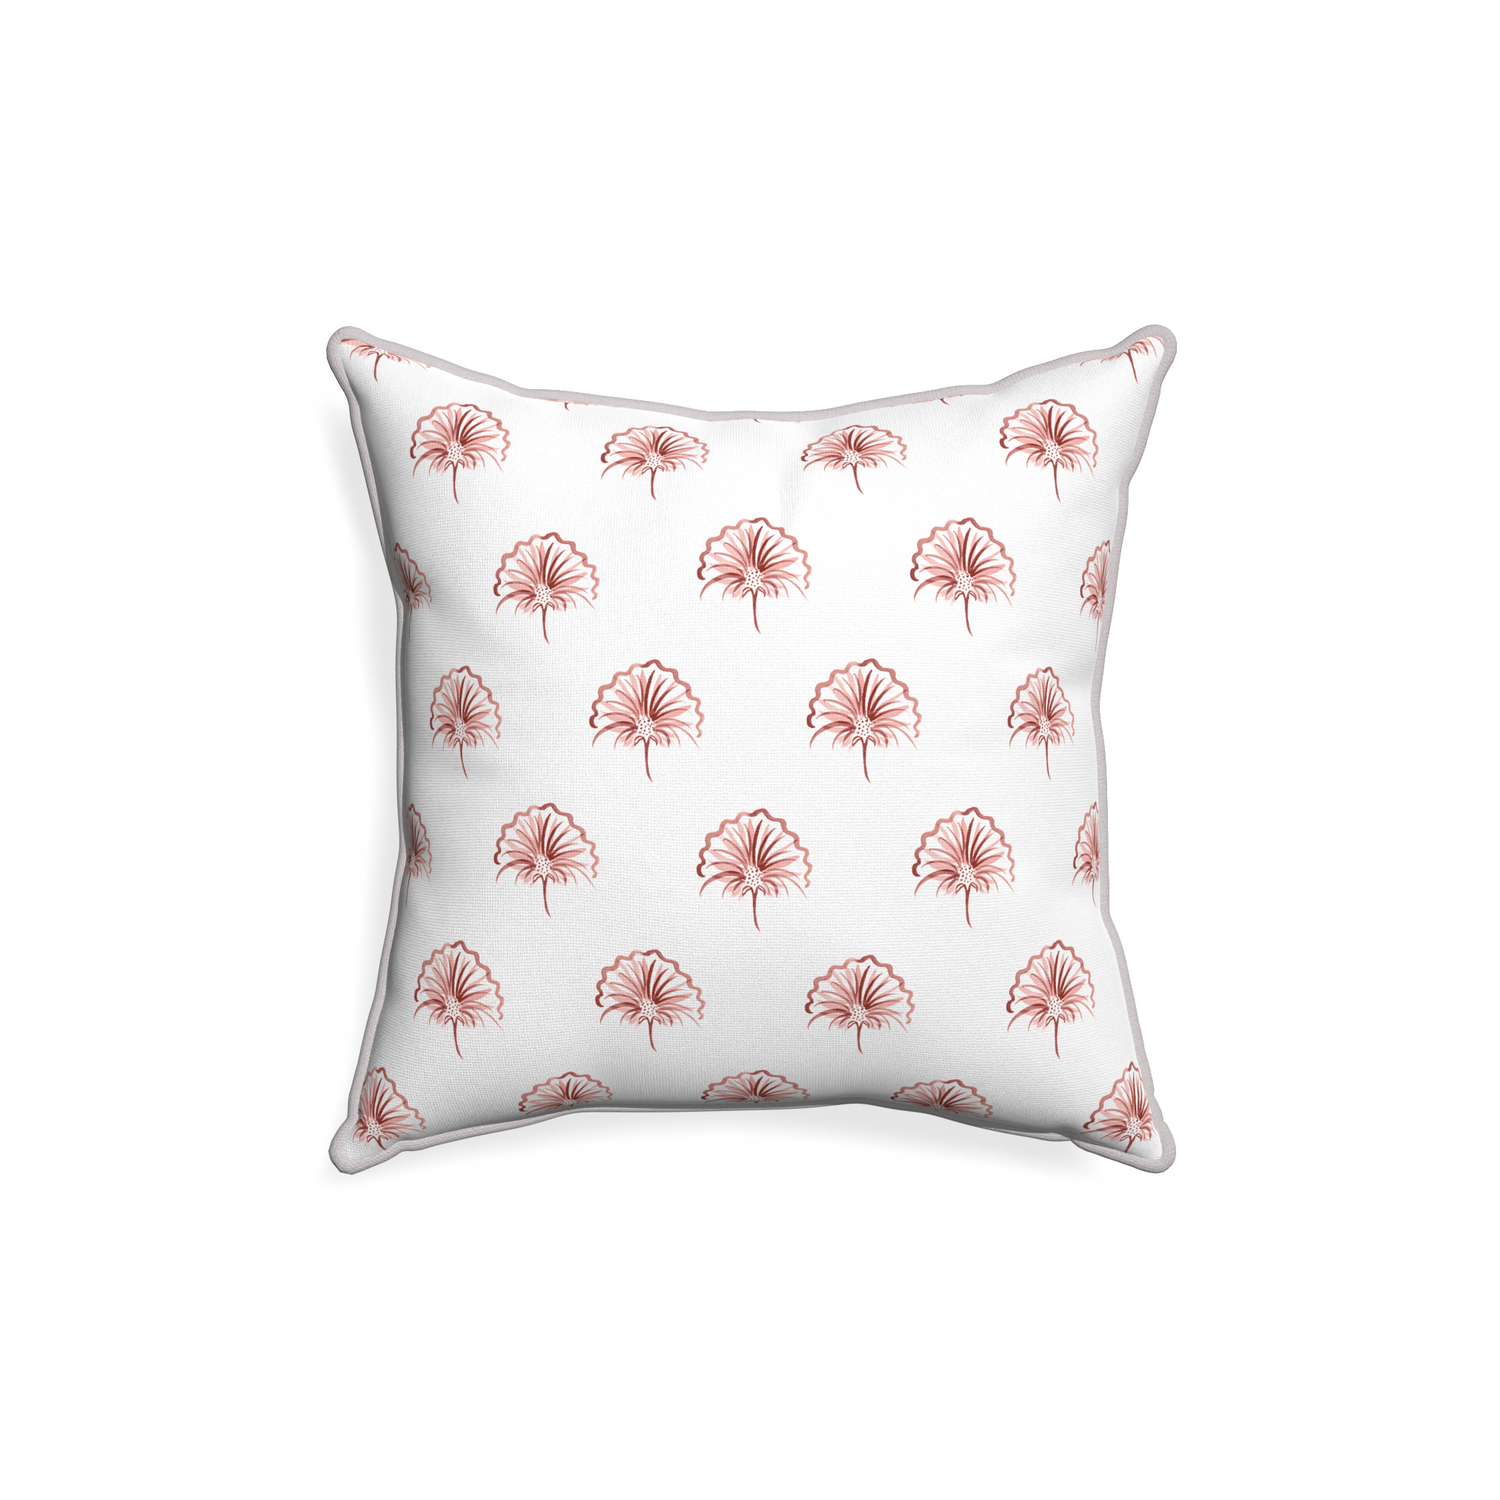 18-square penelope rose custom pillow with pebble piping on white background